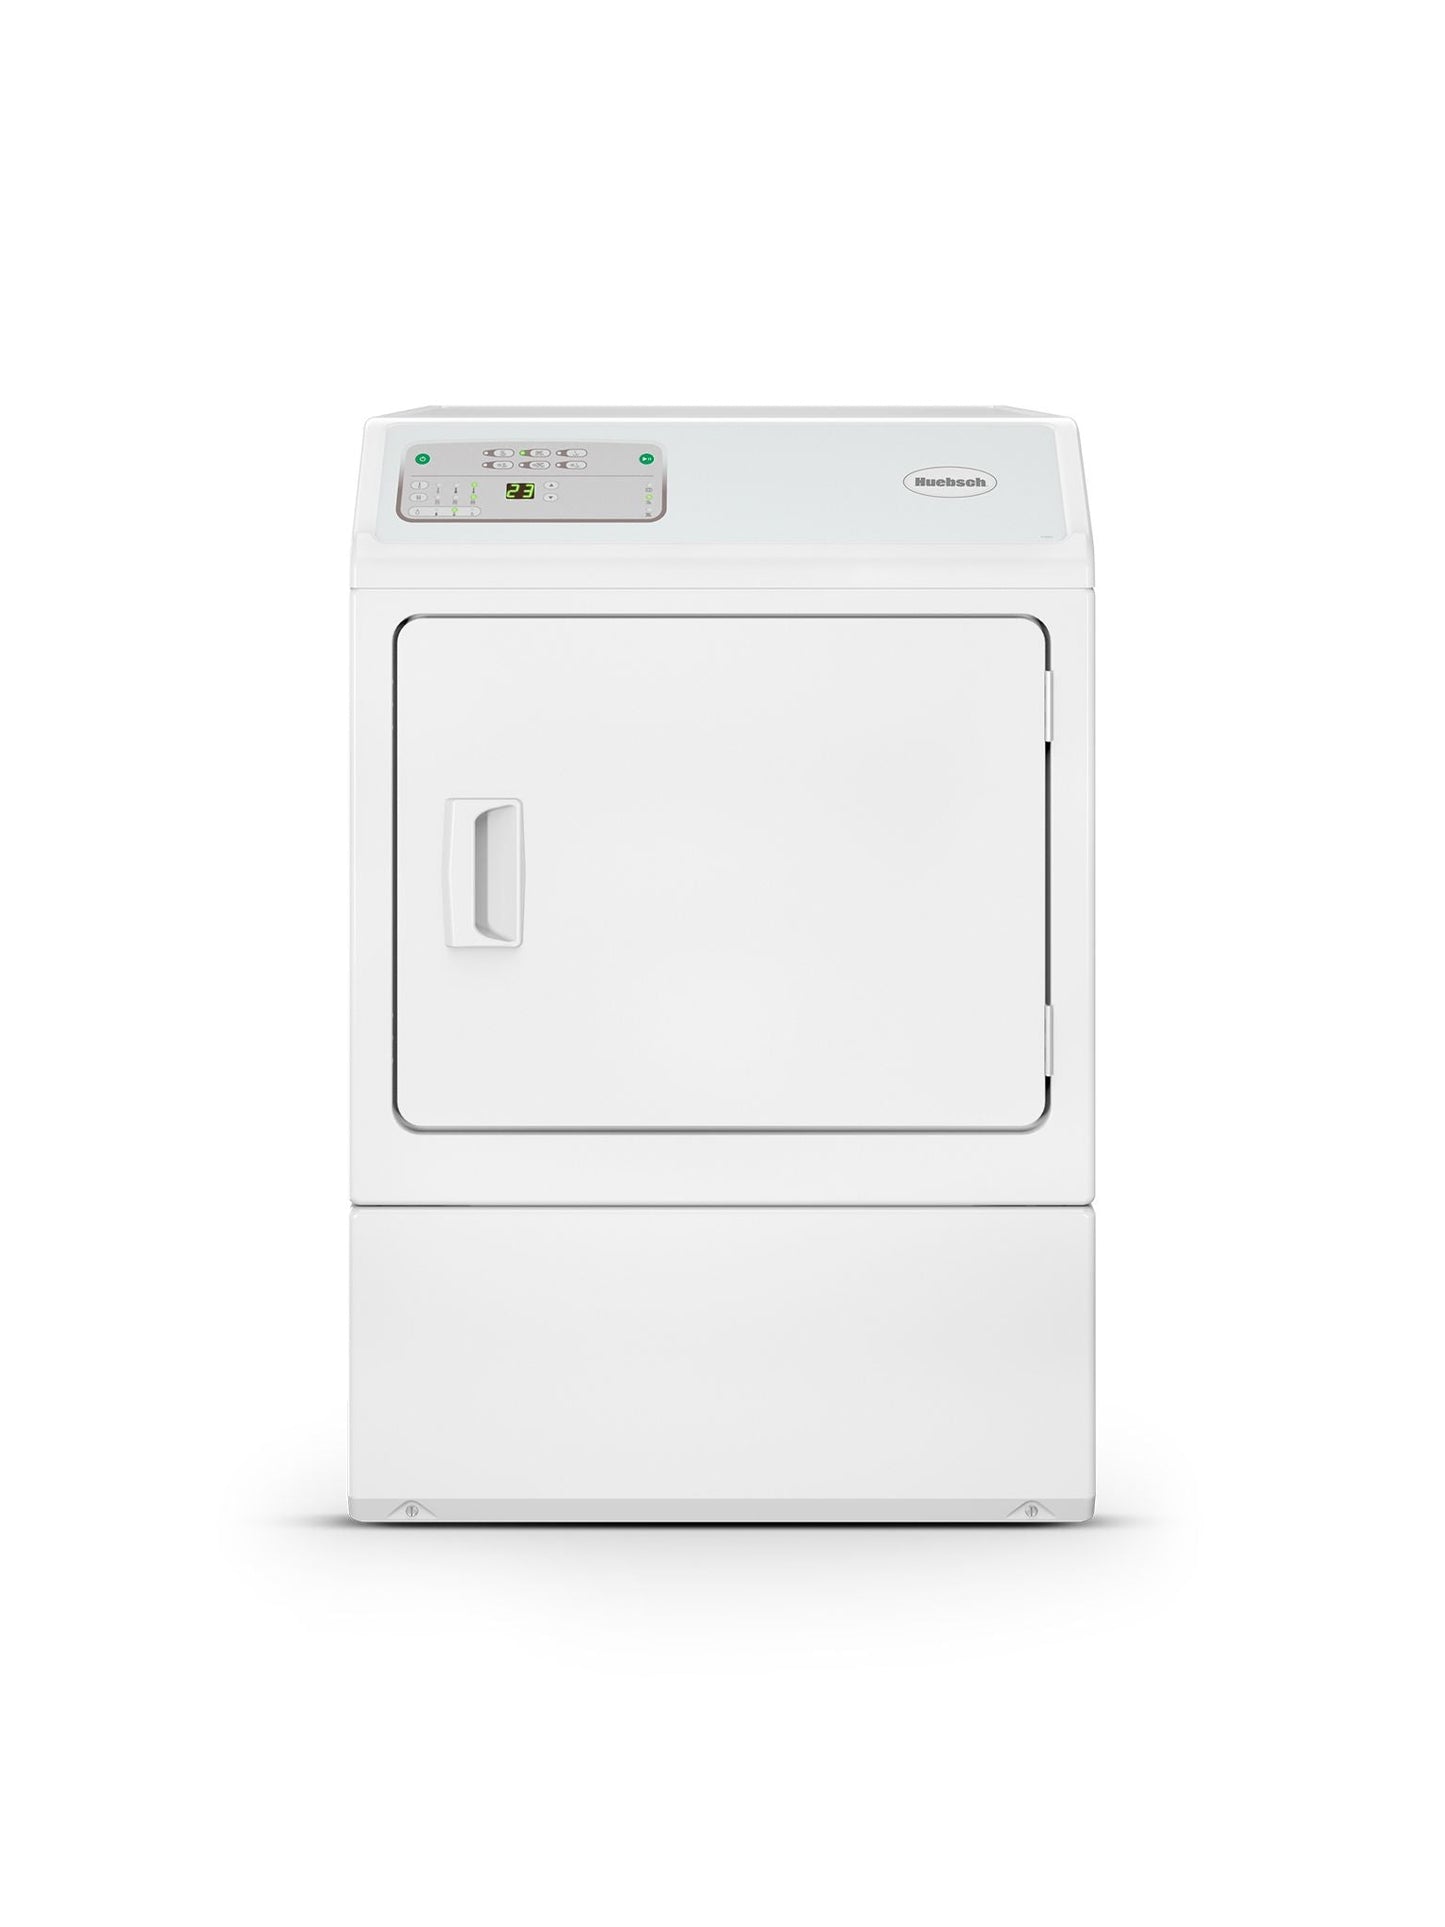 ON-PREMISE FRONT CONTROL SINGLE DRYER – ELECTRONIC S&D